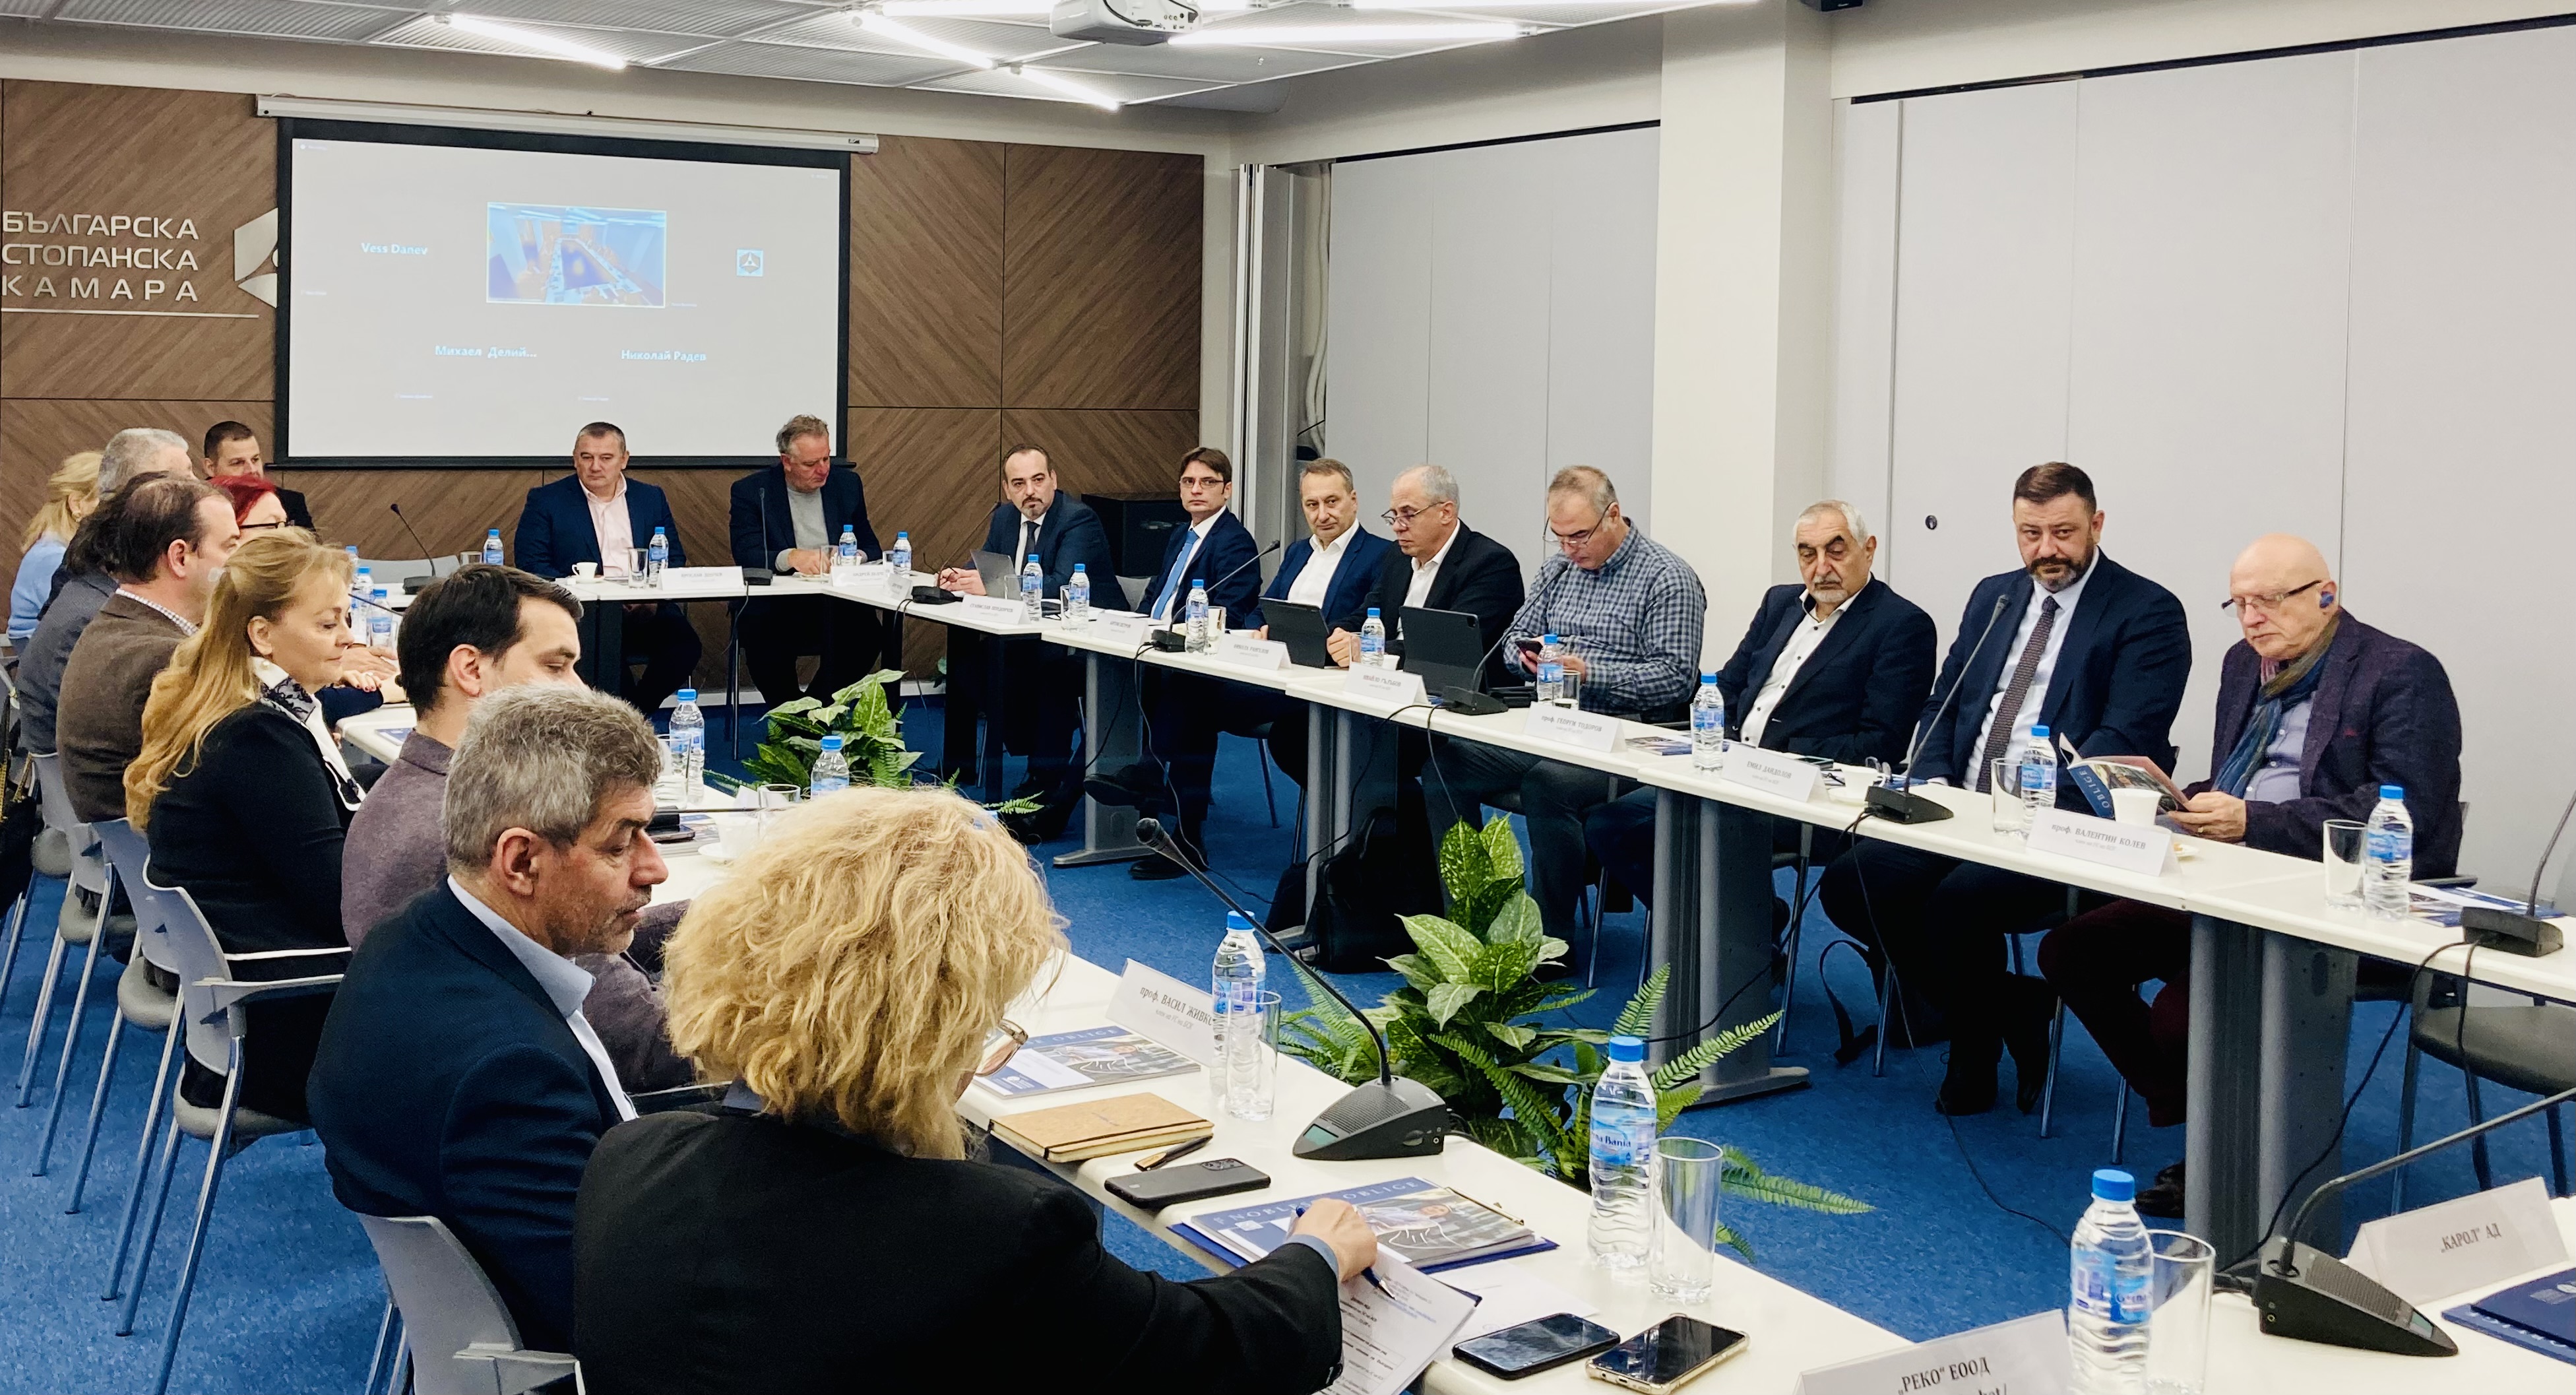 Meeting of the Board of Directors of BIA